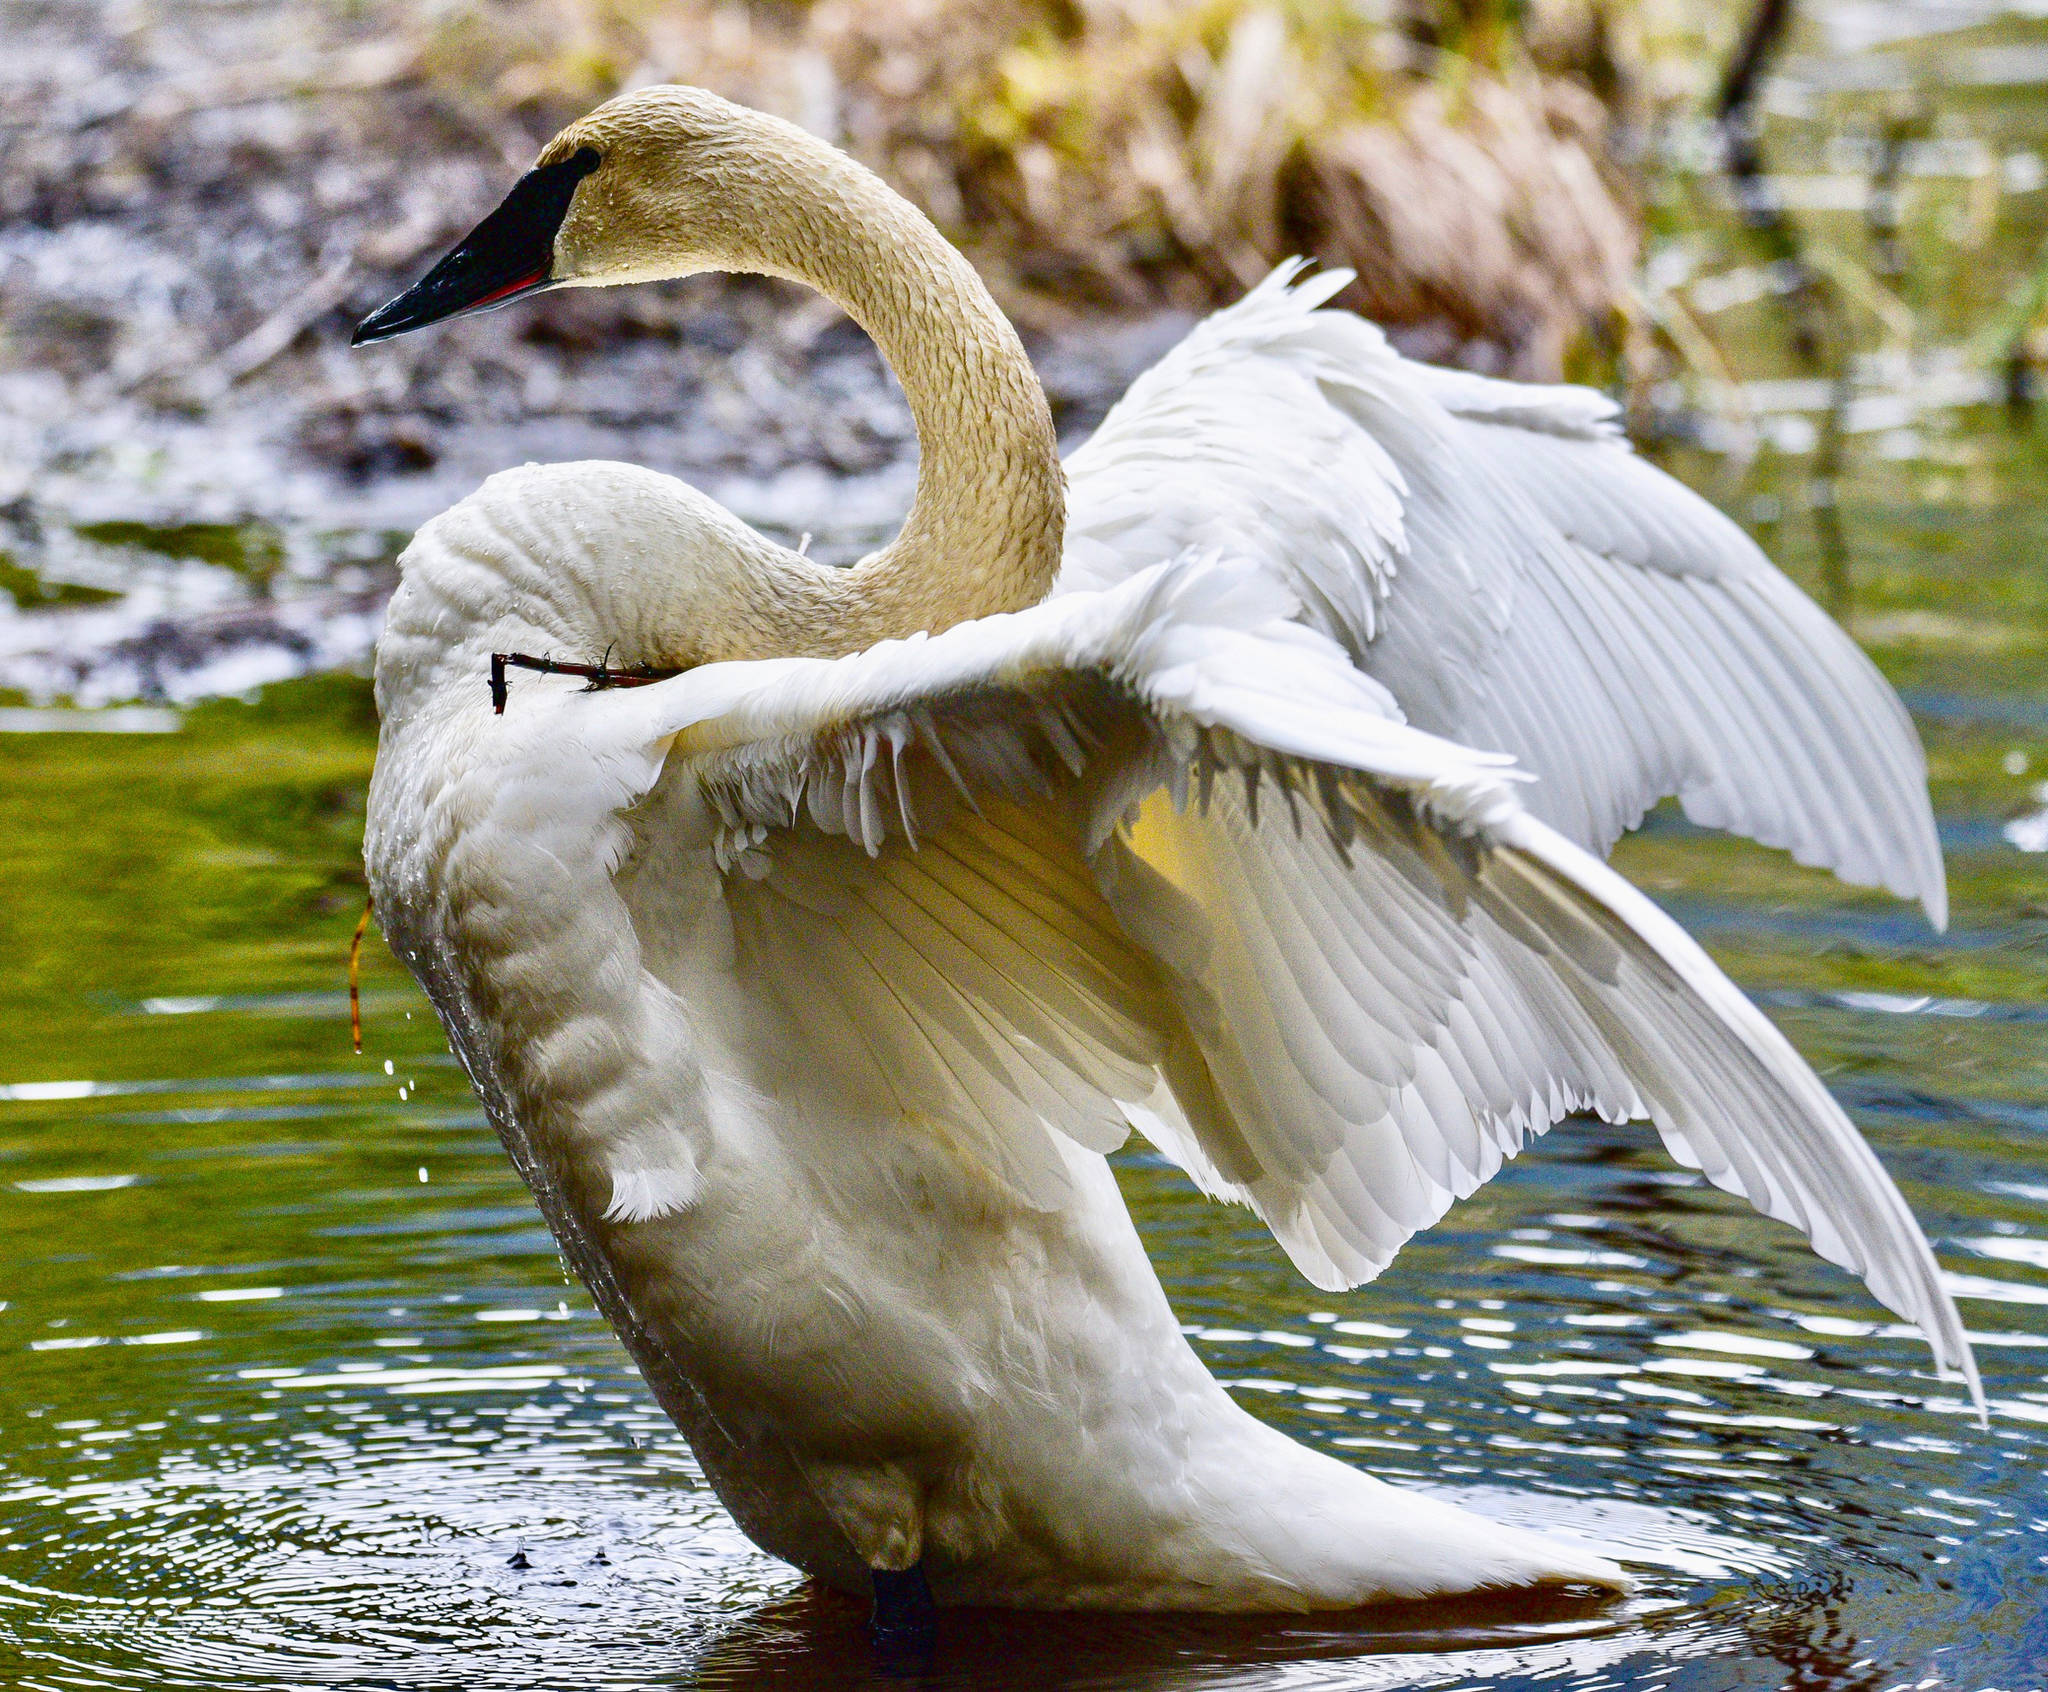 A trumpeter swan stretches in Juneau on April 11, 2019. (Courtesy Photo | Scott Spickler)